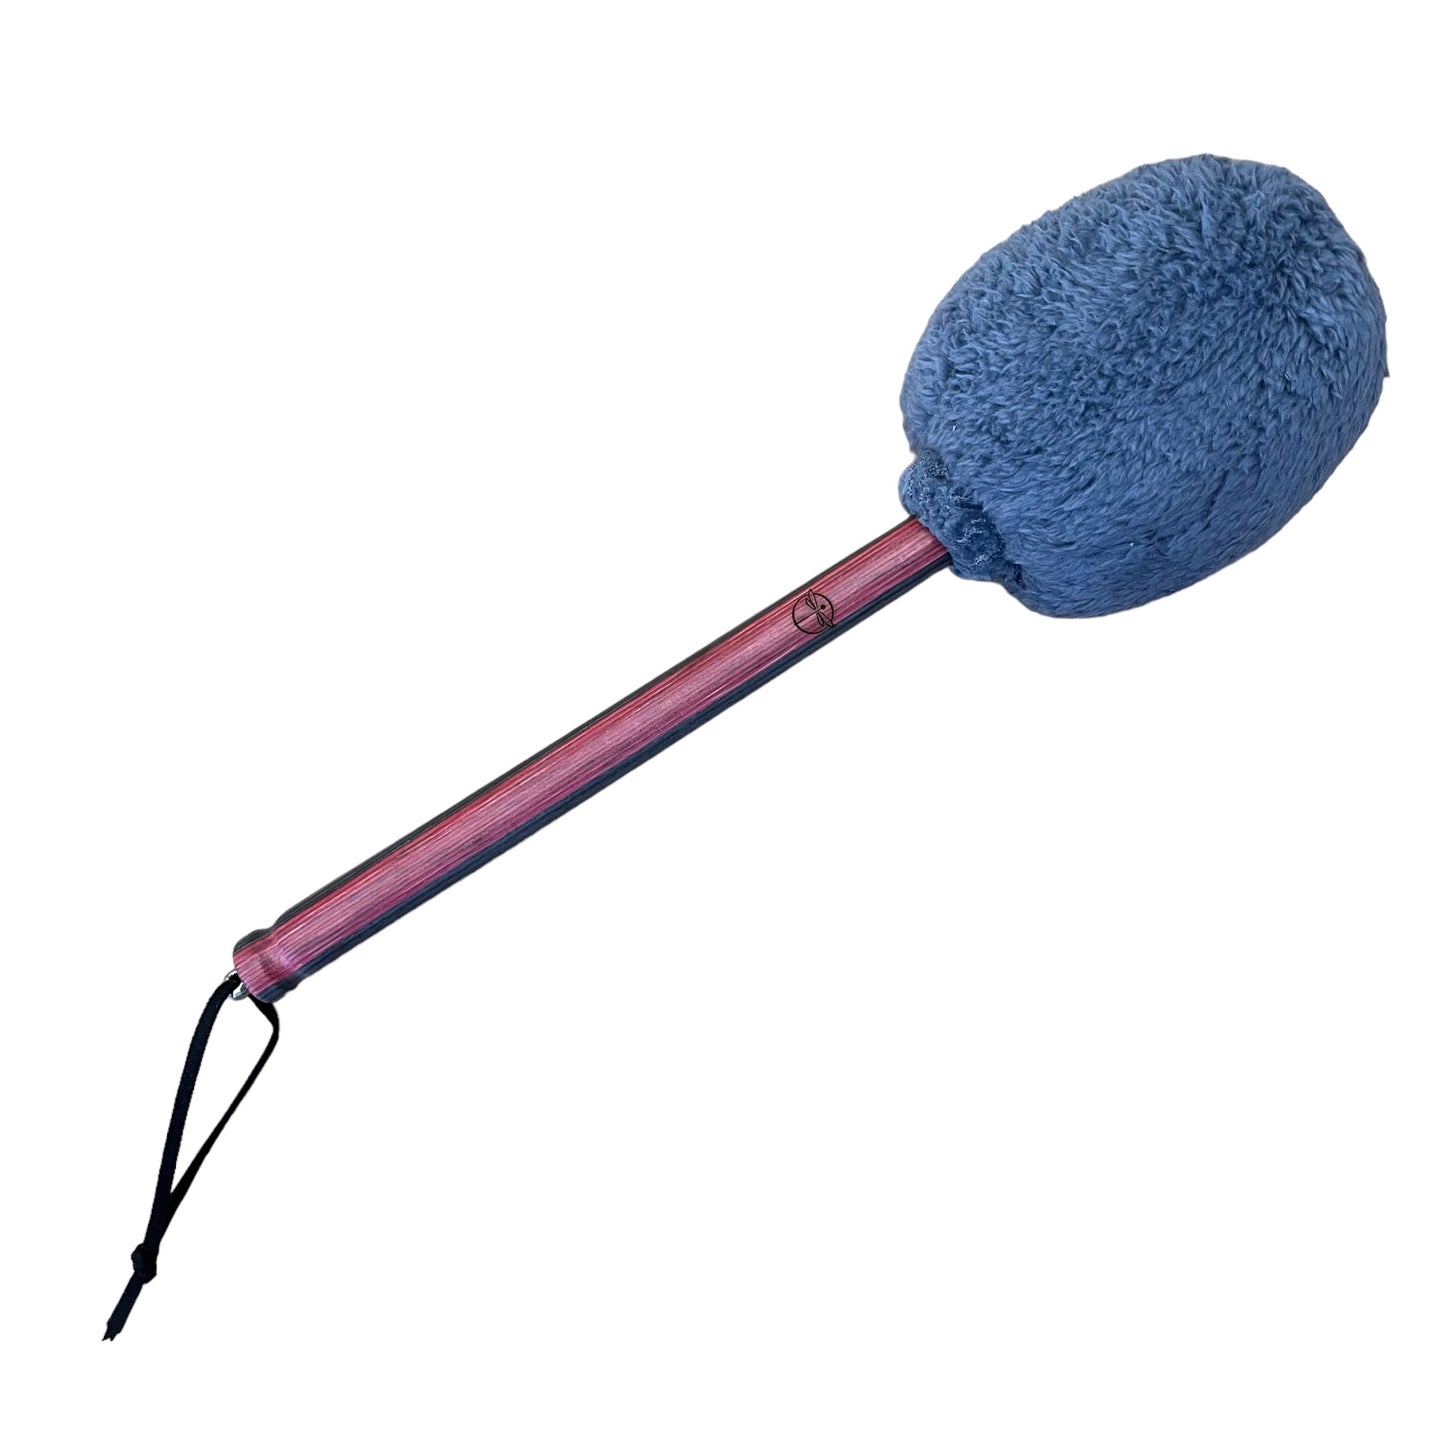 Dragonfly Resonance Series RSF Series Gong Mallets